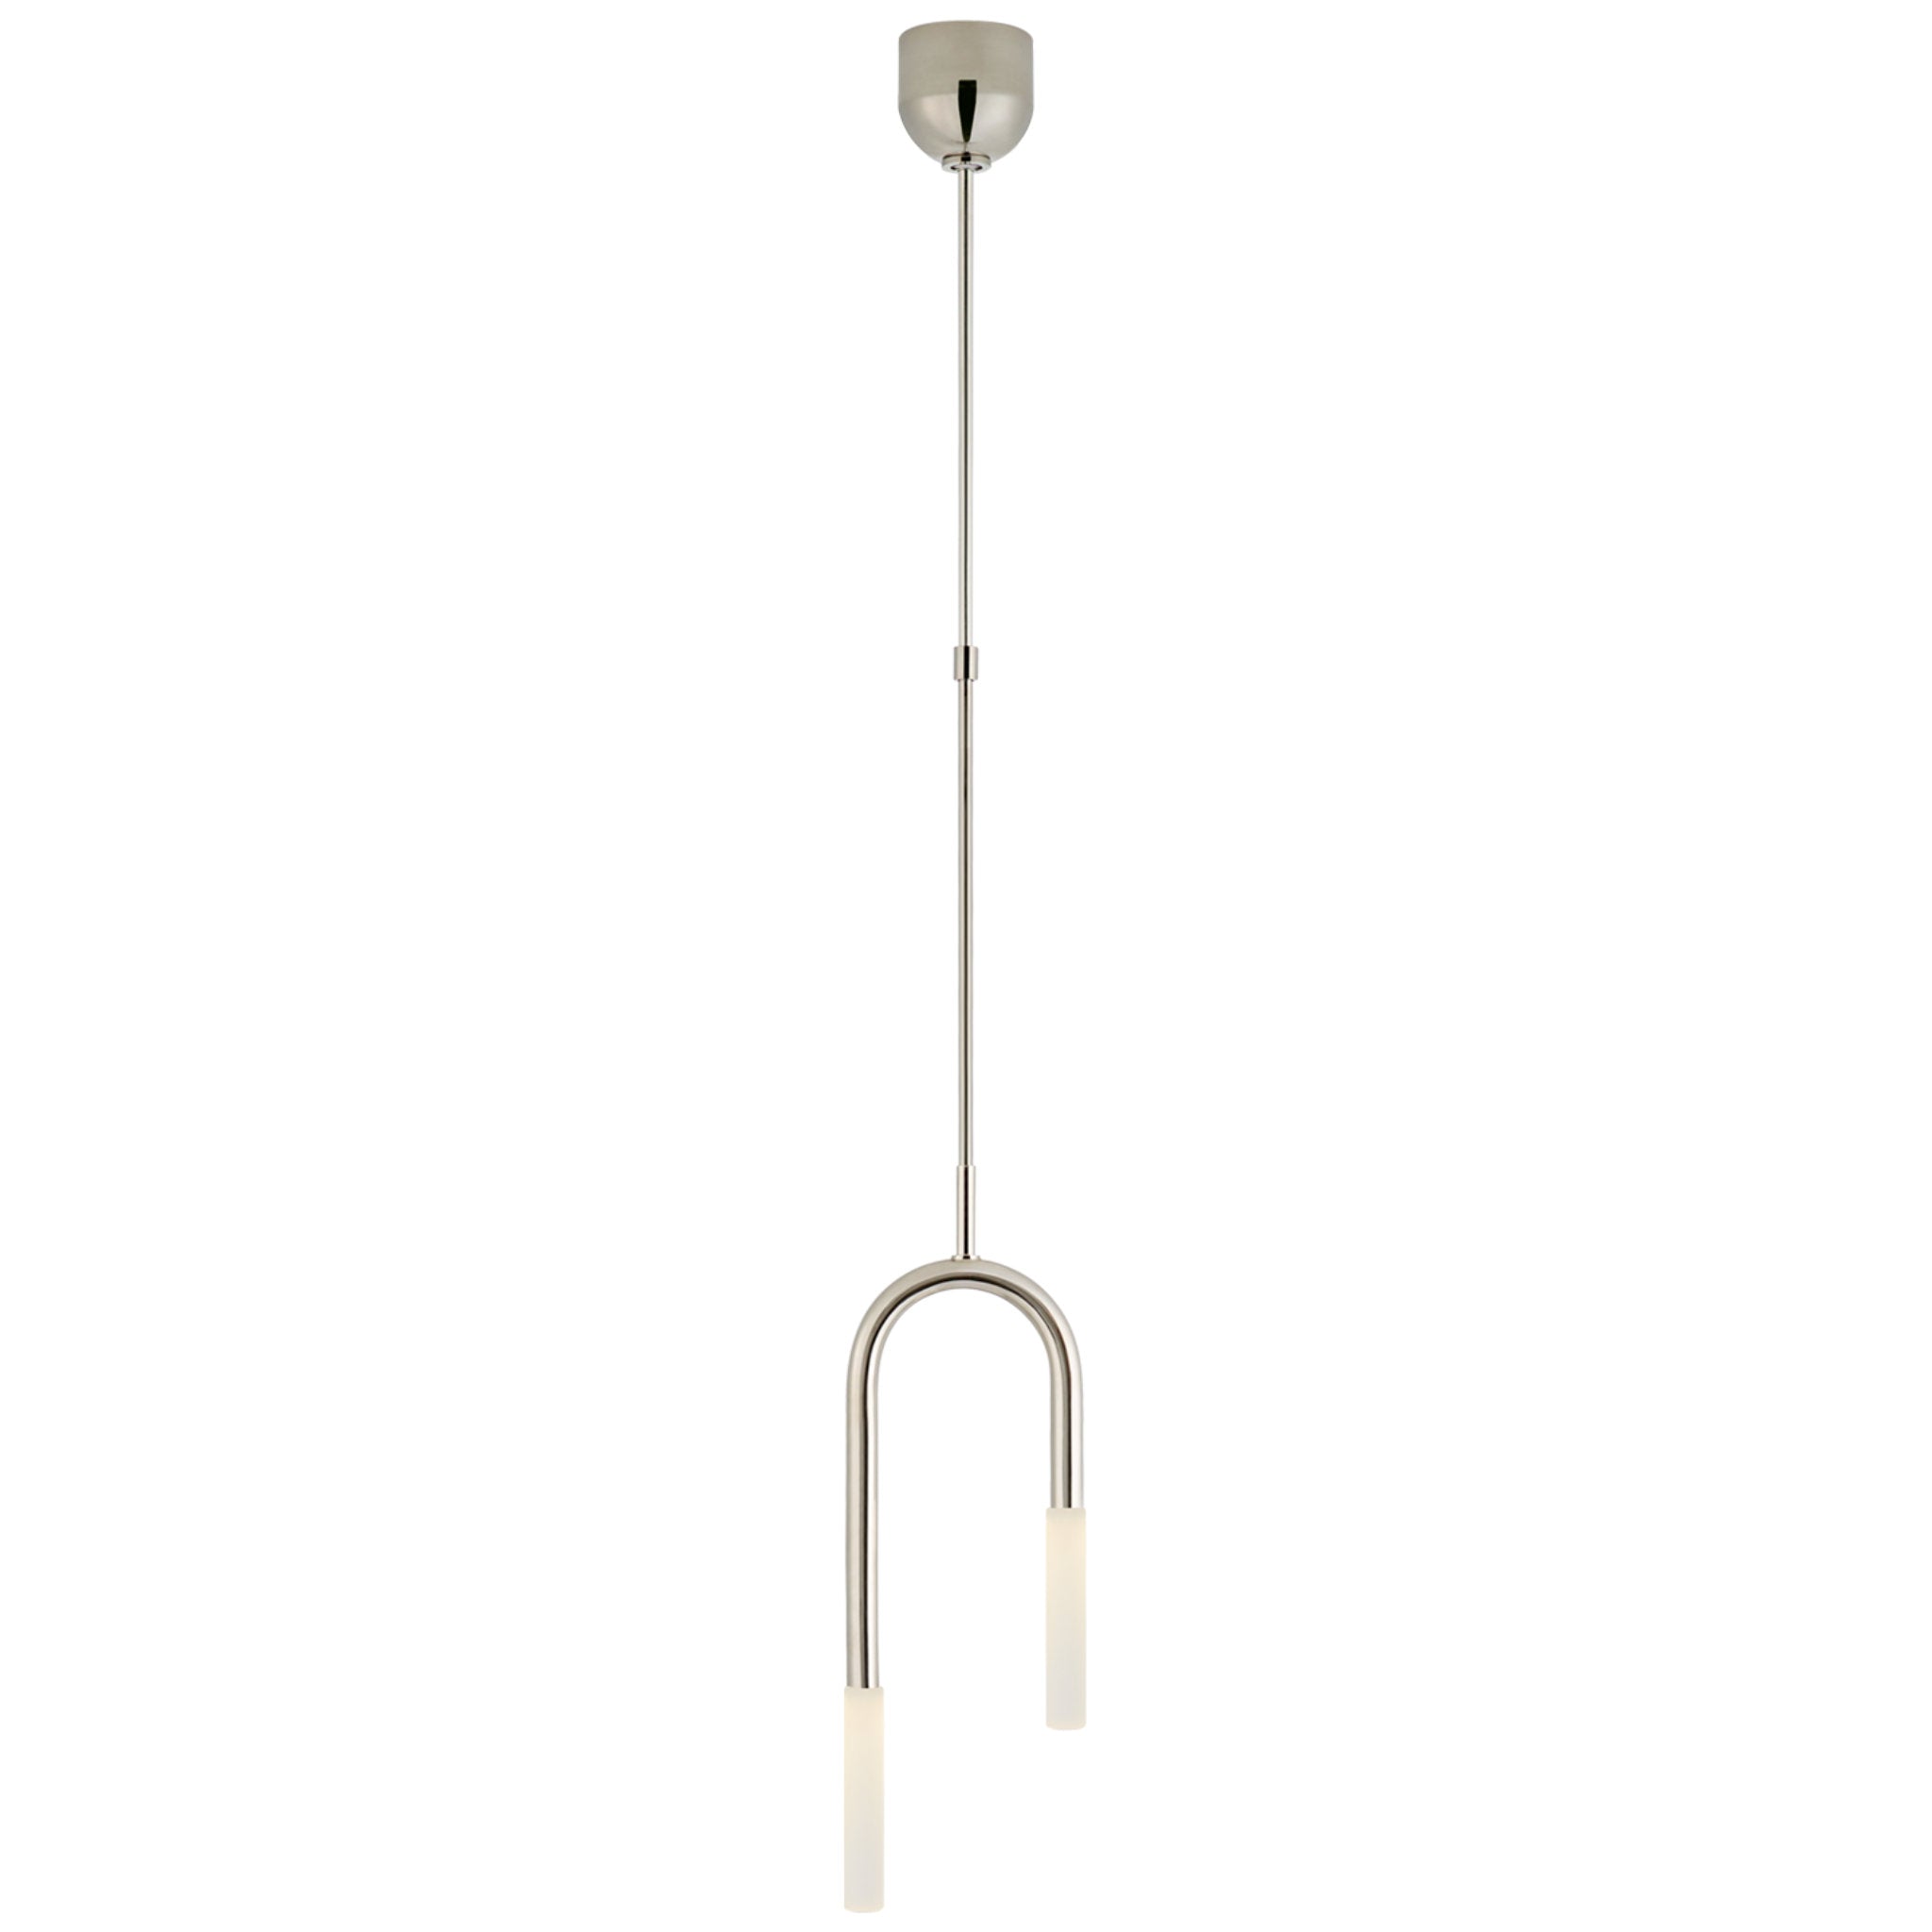 Kelly Wearstler Rousseau Small Asymmetric Pendant in Polished Nickel with Etched Crystal